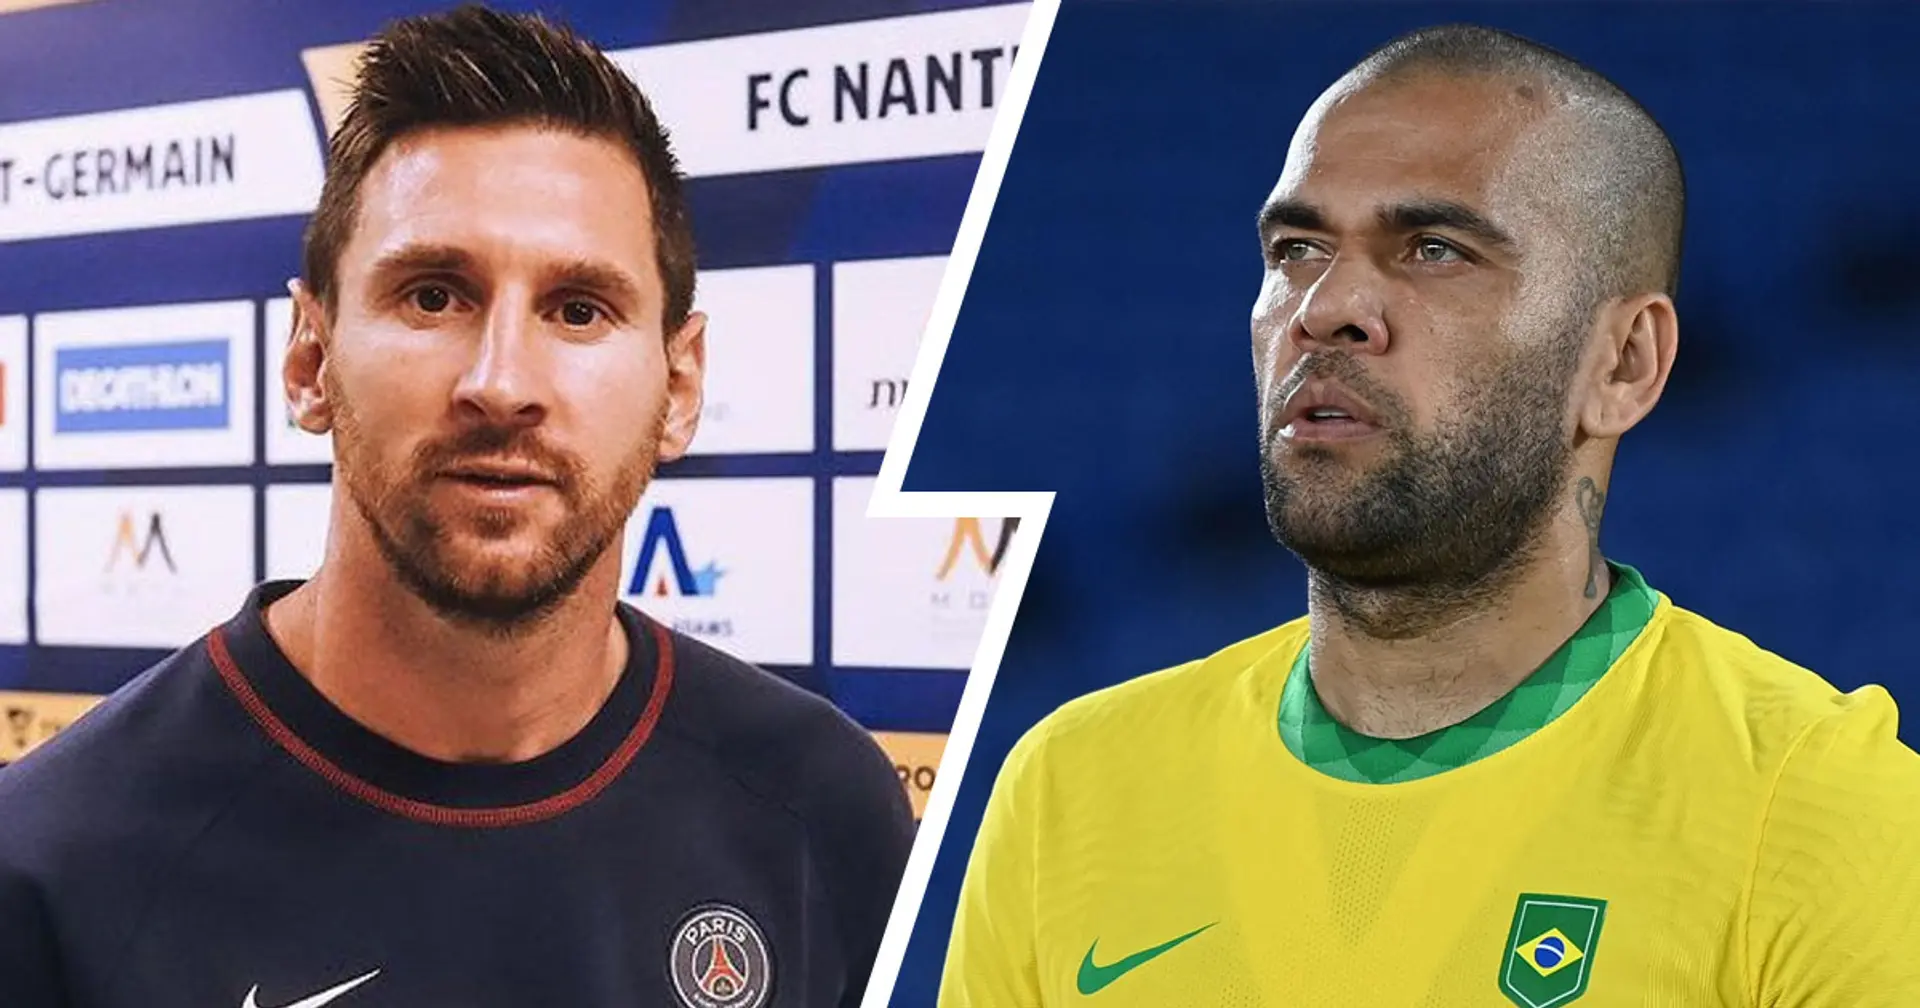 Lionel Messi closes in on Dani Alves' record after winning 41st career trophy